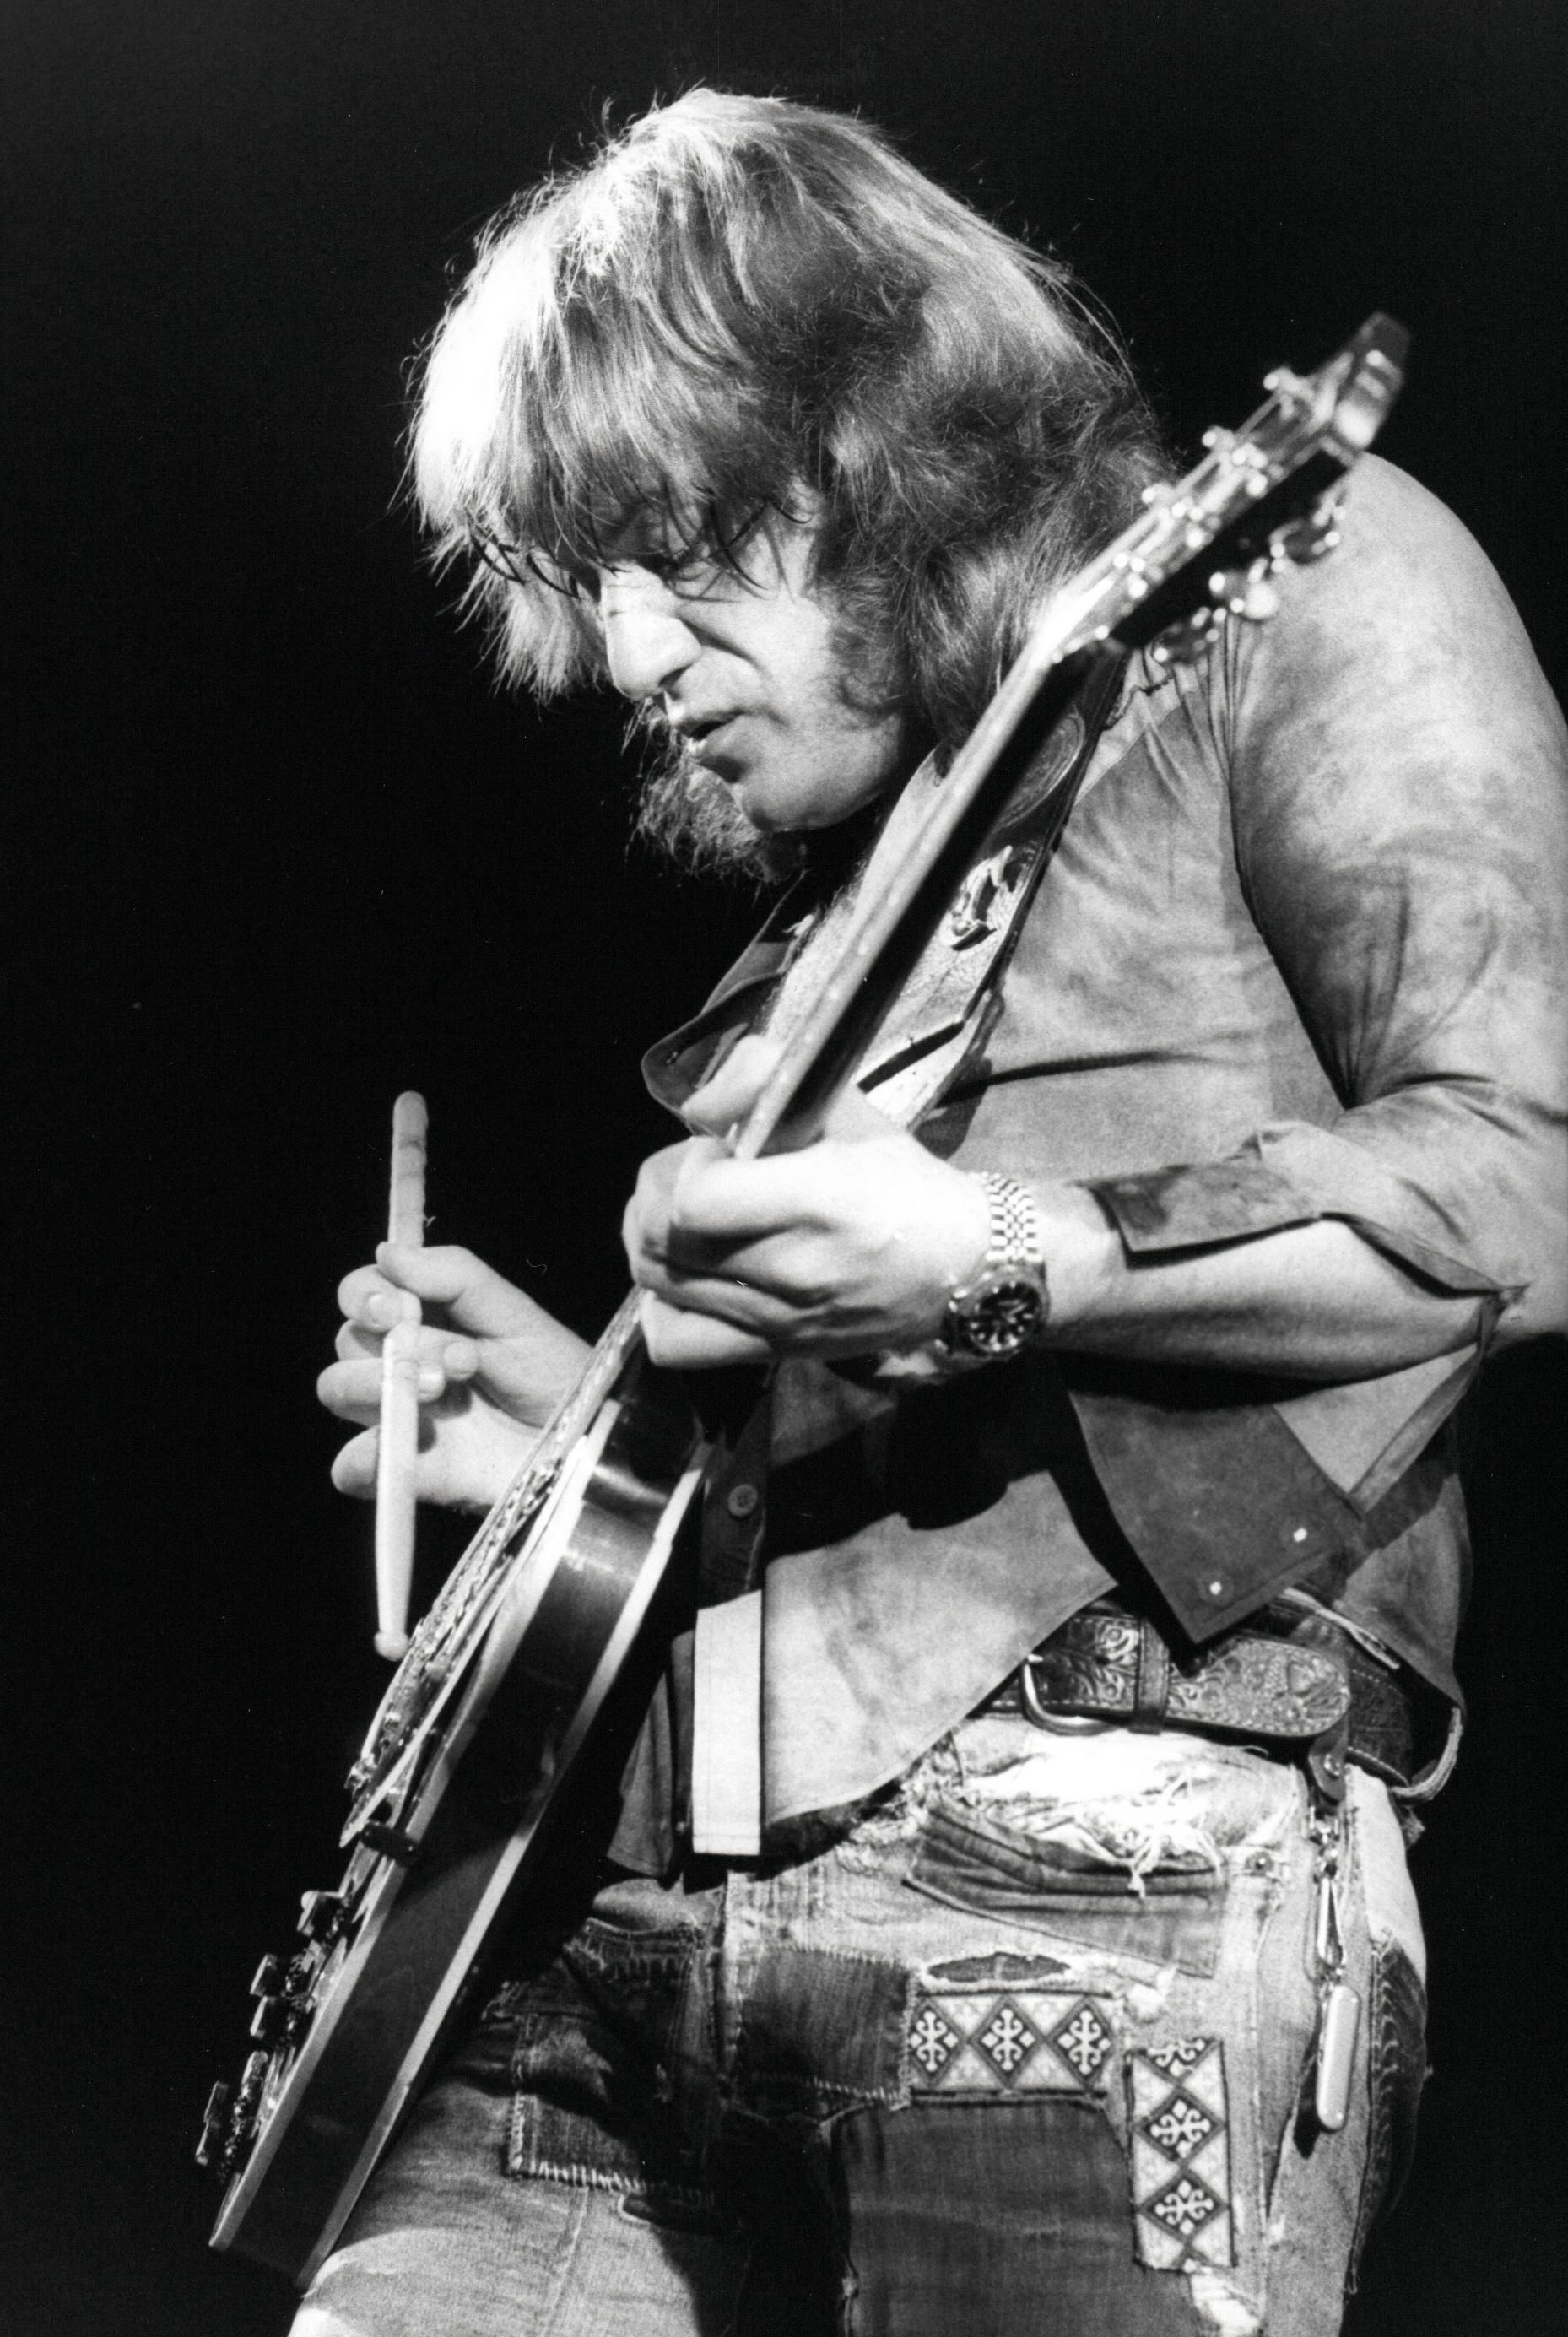 Paul Cox Black and White Photograph - Alvin Lee Playing Guitar with Drum Stick Vintage Original Photograph